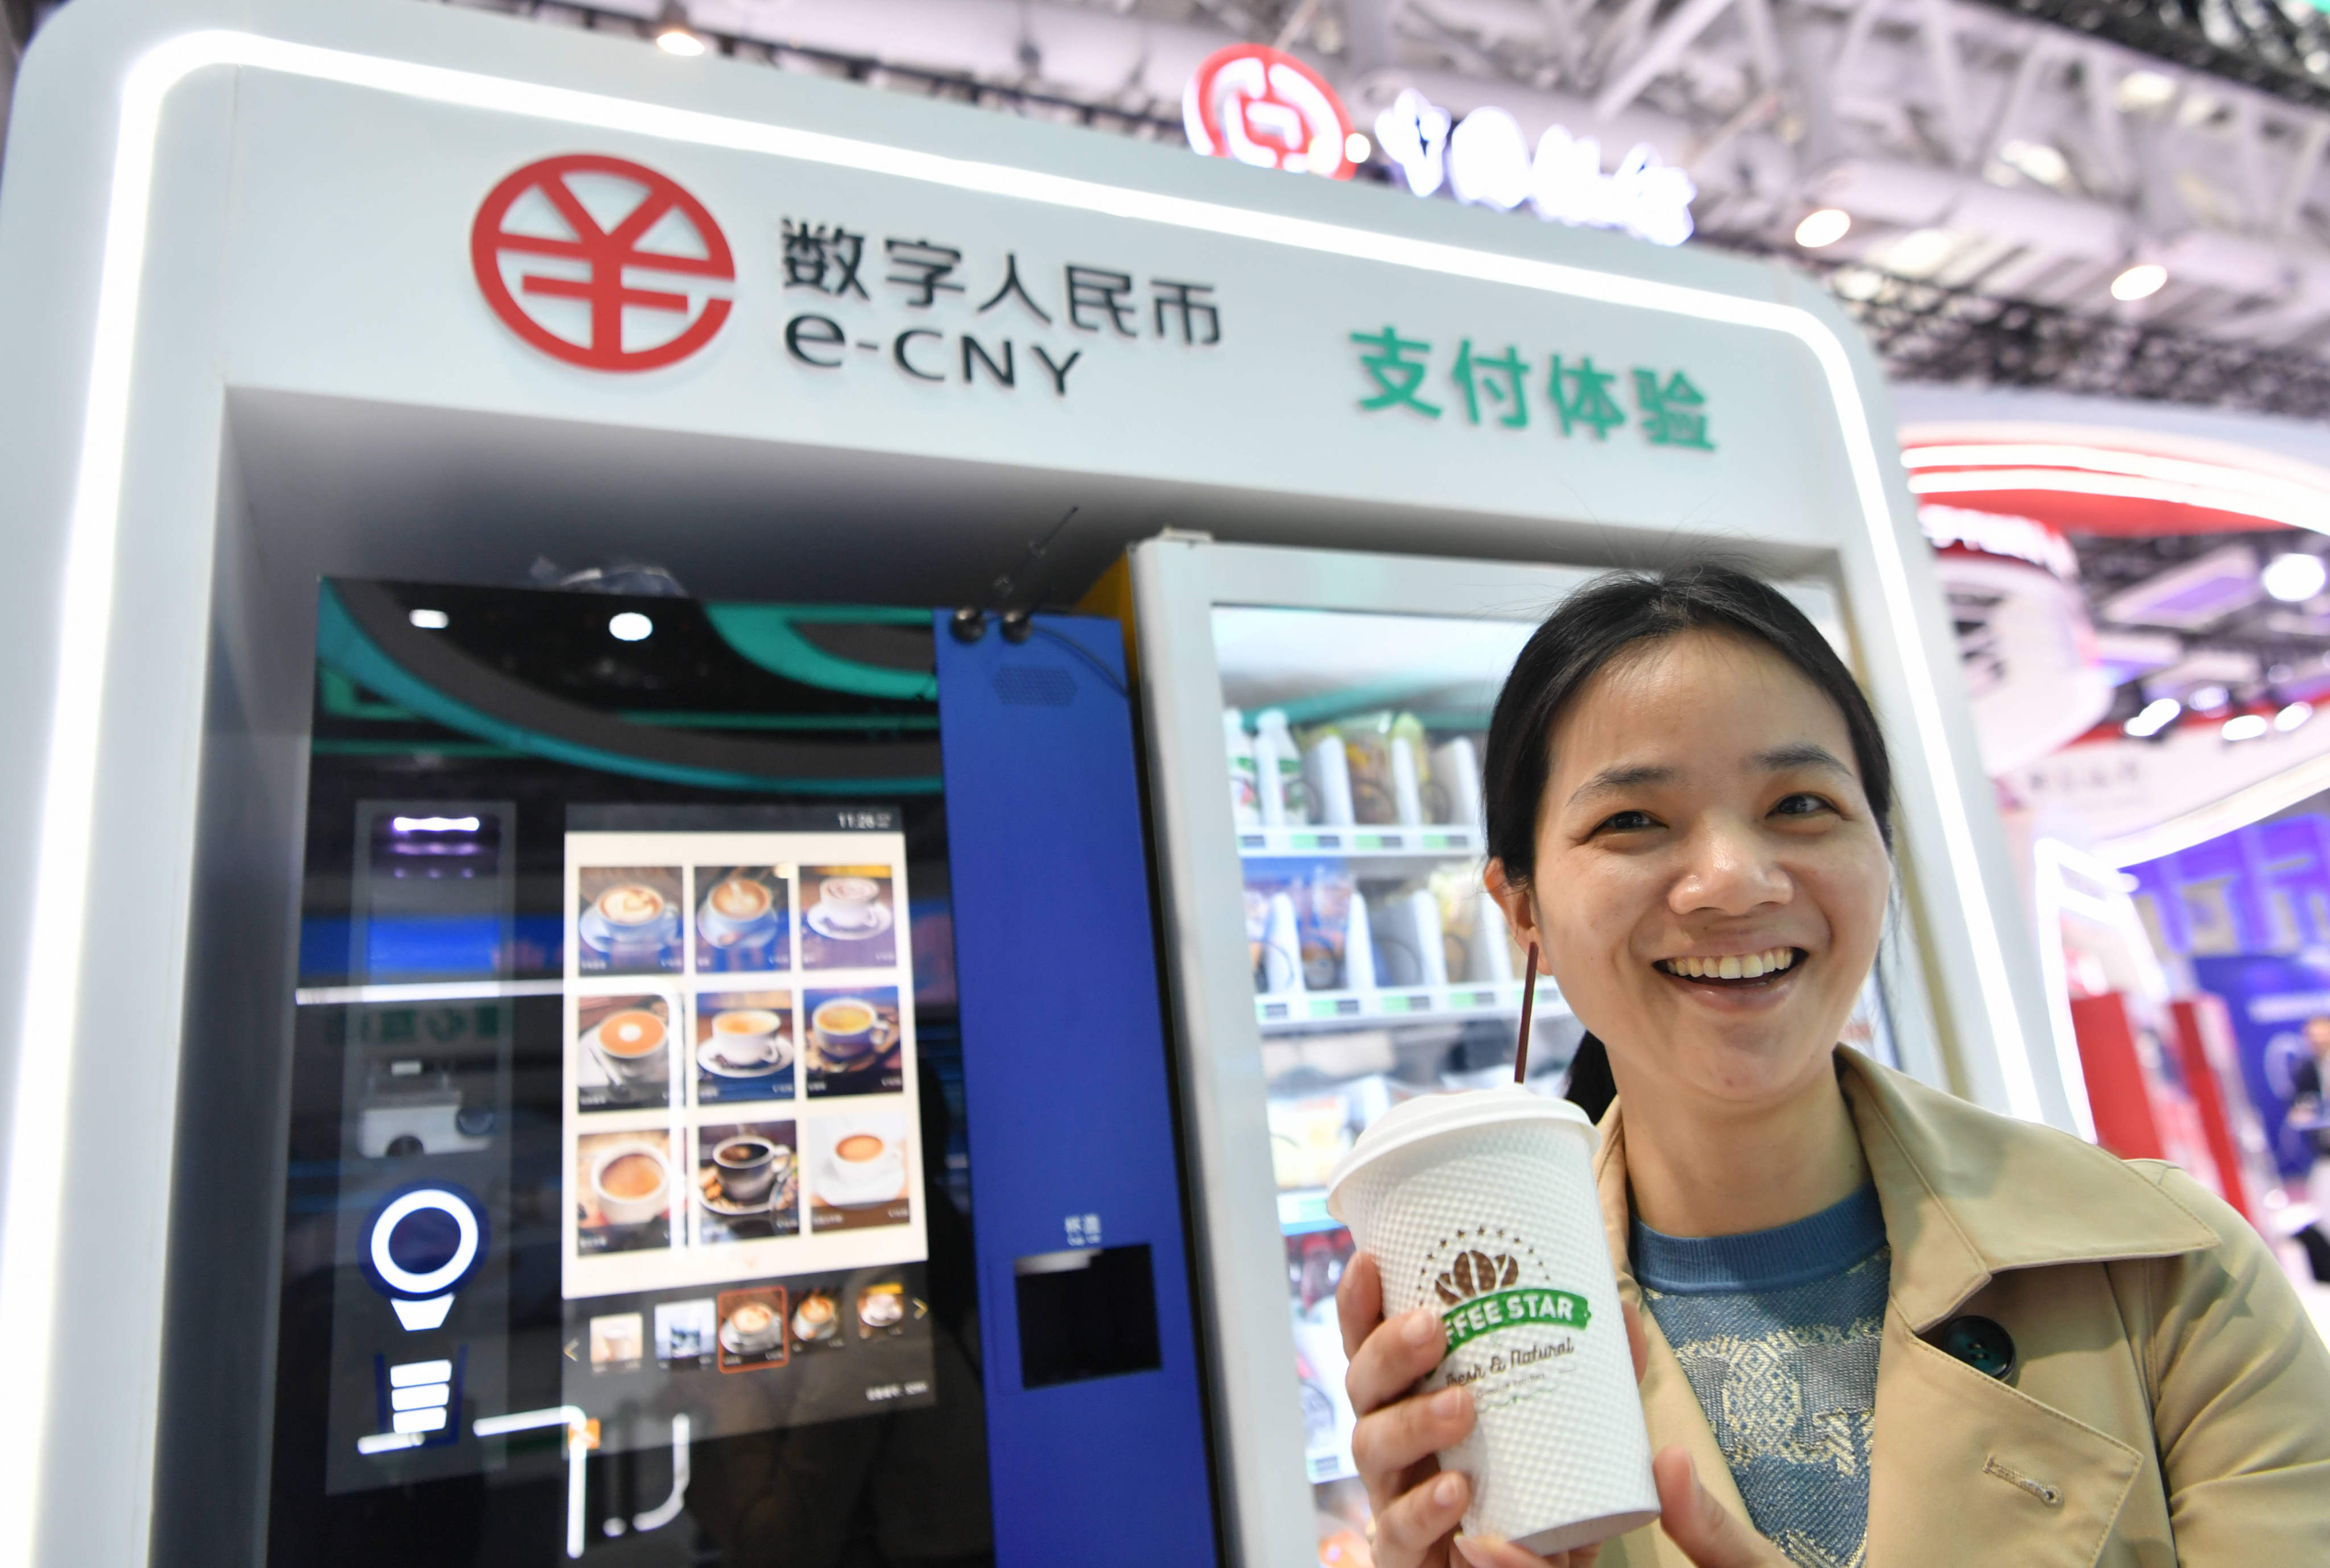 A visitor displays a cup of coffee bought with digital yuan at the 6th Digital China Summit in Fuzhou, Fujian province, on April 26. Photo: Xinhua